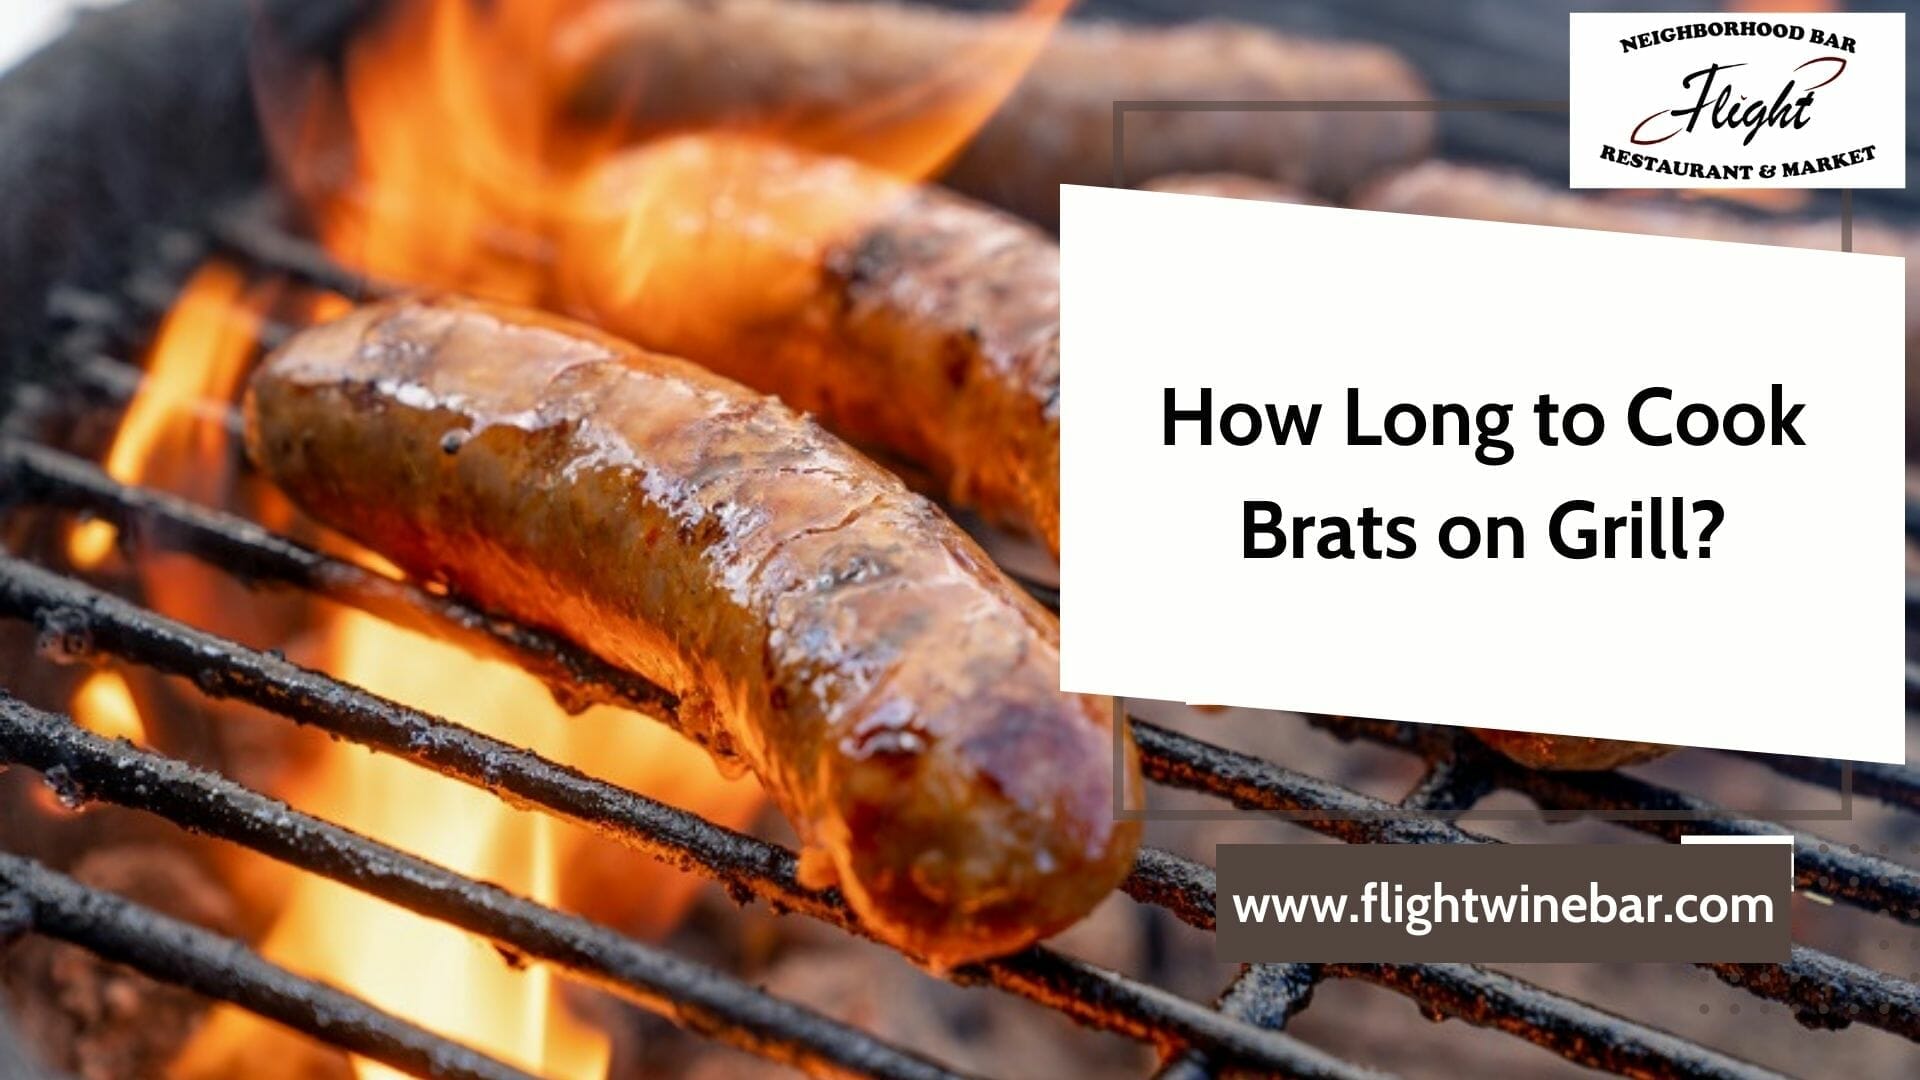 How Long to Cook Brats on Grill